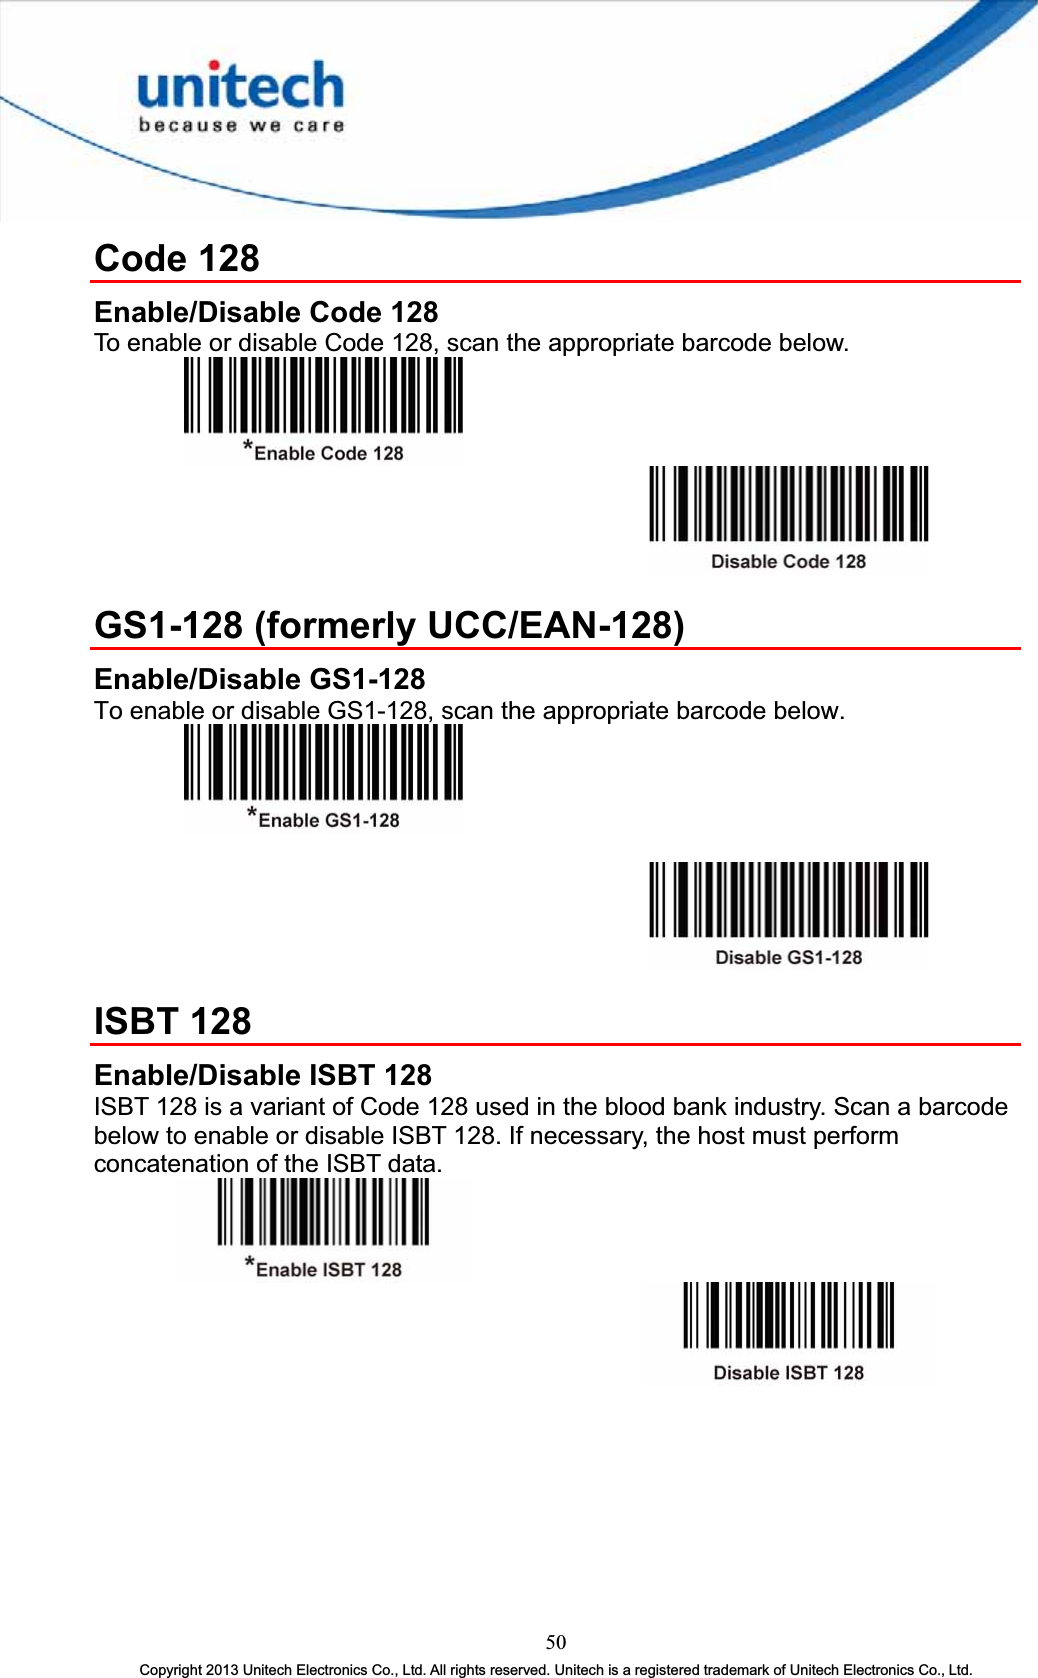 Code 128 Enable/Disable Code 128 To enable or disable Code 128, scan the appropriate barcode below. GS1-128 (formerly UCC/EAN-128) Enable/Disable GS1-128 To enable or disable GS1-128, scan the appropriate barcode below. ISBT 128 Enable/Disable ISBT 128 ISBT 128 is a variant of Code 128 used in the blood bank industry. Scan a barcode below to enable or disable ISBT 128. If necessary, the host must perform concatenation of the ISBT data. 50Copyright 2013 Unitech Electronics Co., Ltd. All rights reserved. Unitech is a registered trademark of Unitech Electronics Co., Ltd. 